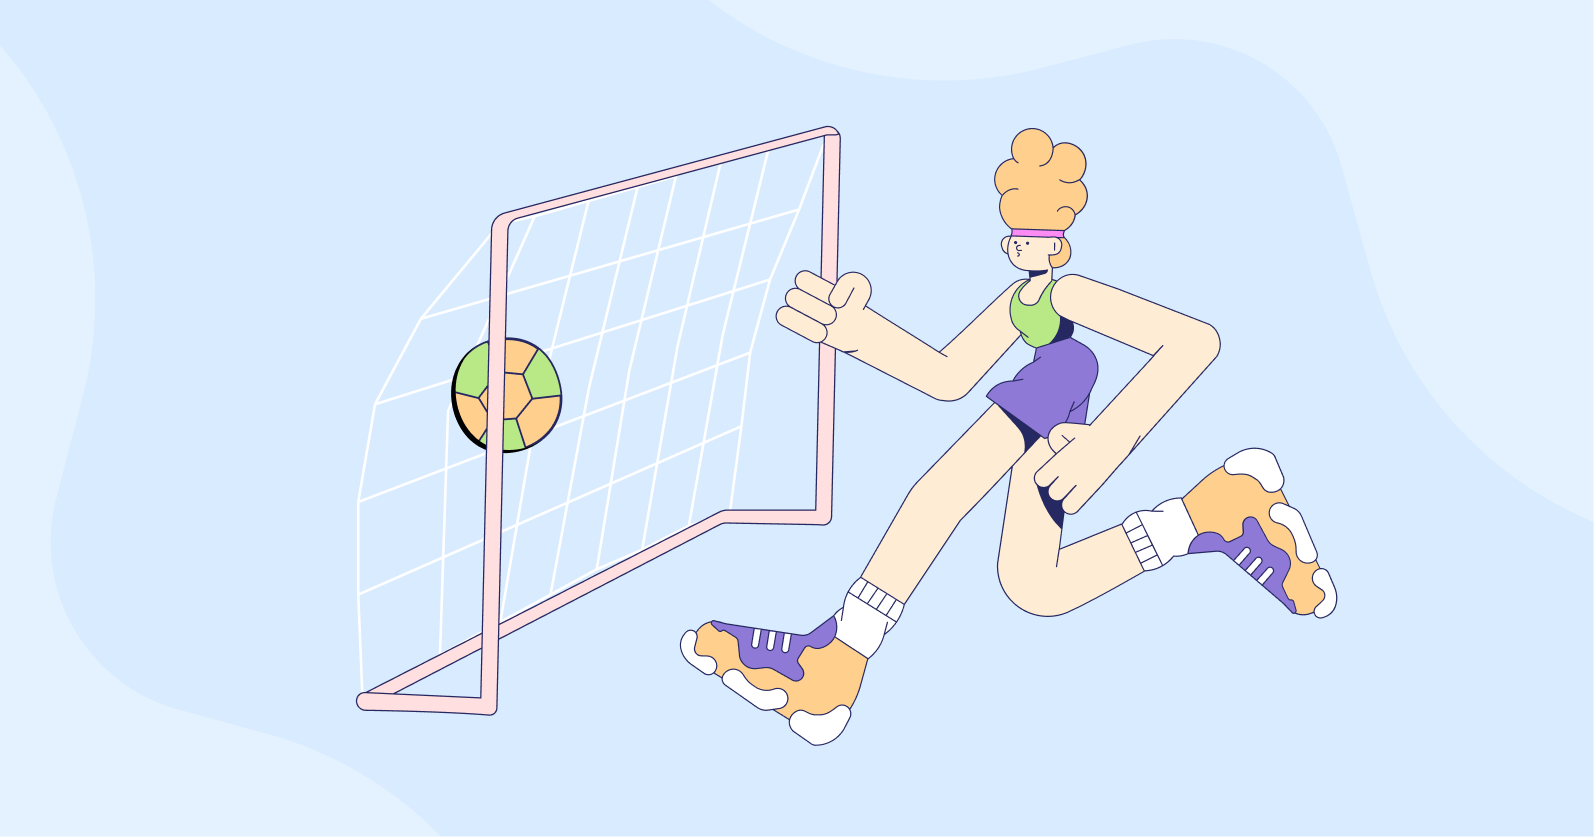 Illustration of a person kicking a soccer ball into the goal.